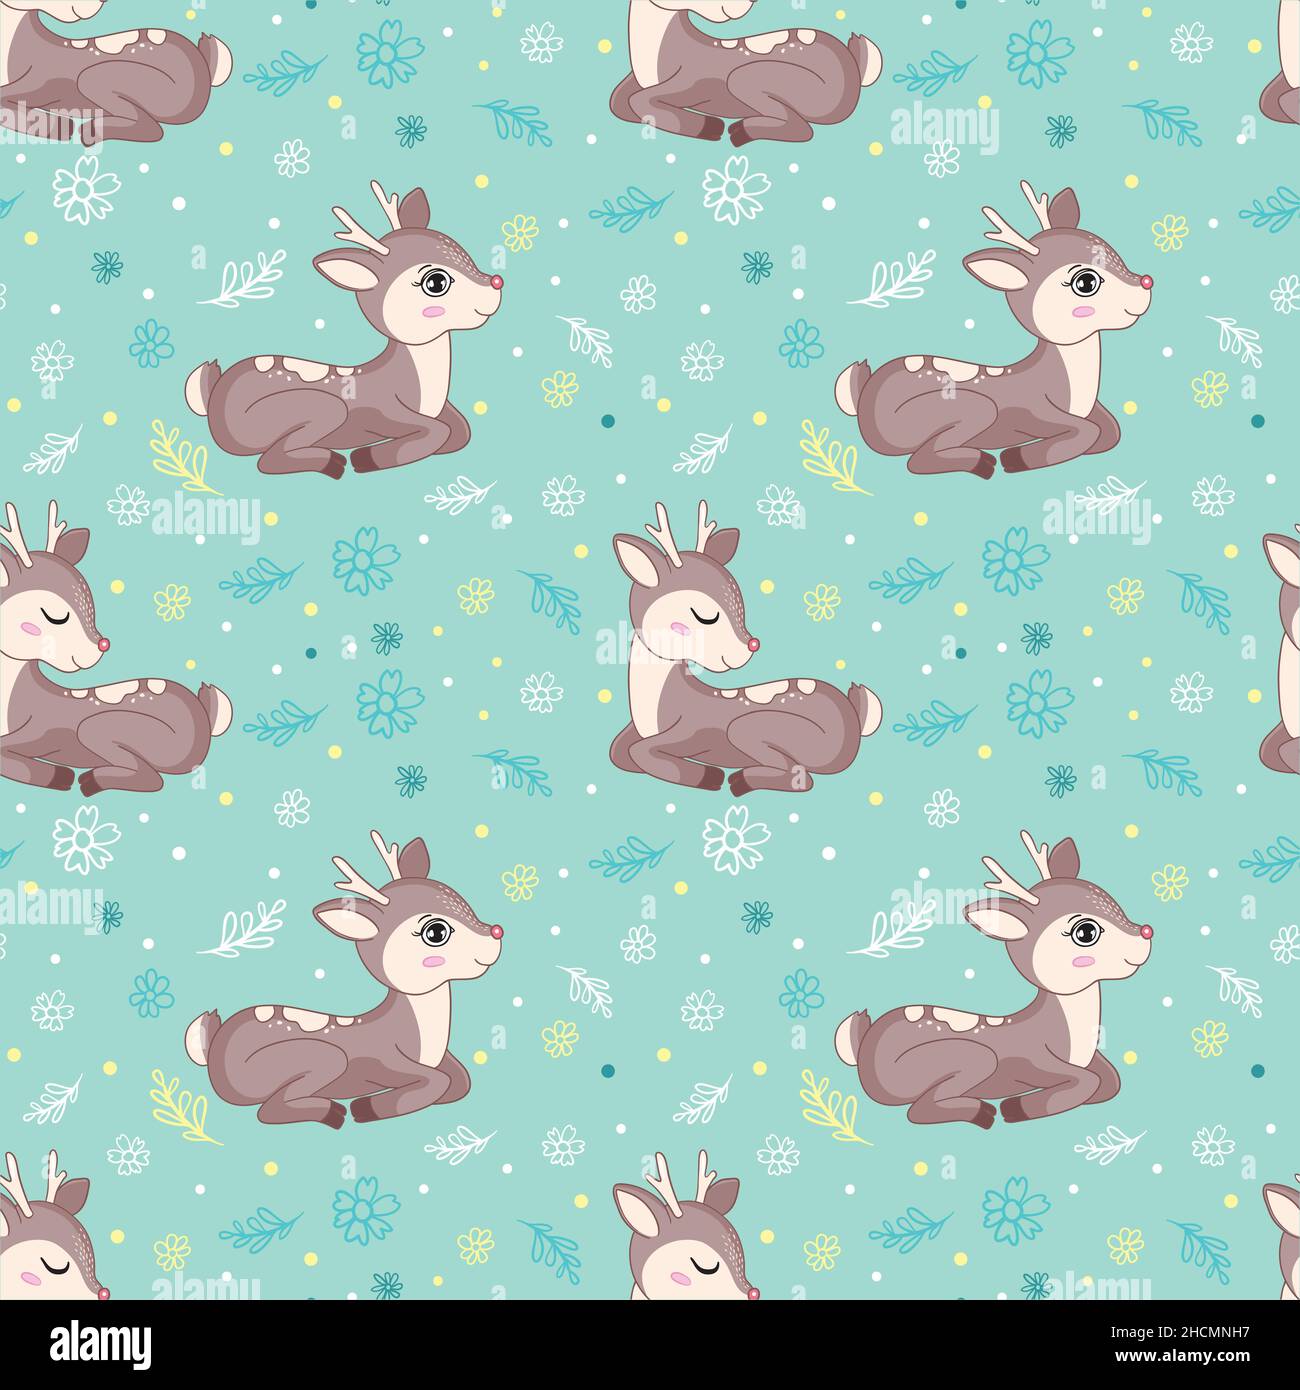 Seamless pattern with wild deers. Perfect for cards, invitations, party, banners, kindergarten, baby shower, preschool and children room decoration. Stock Vector